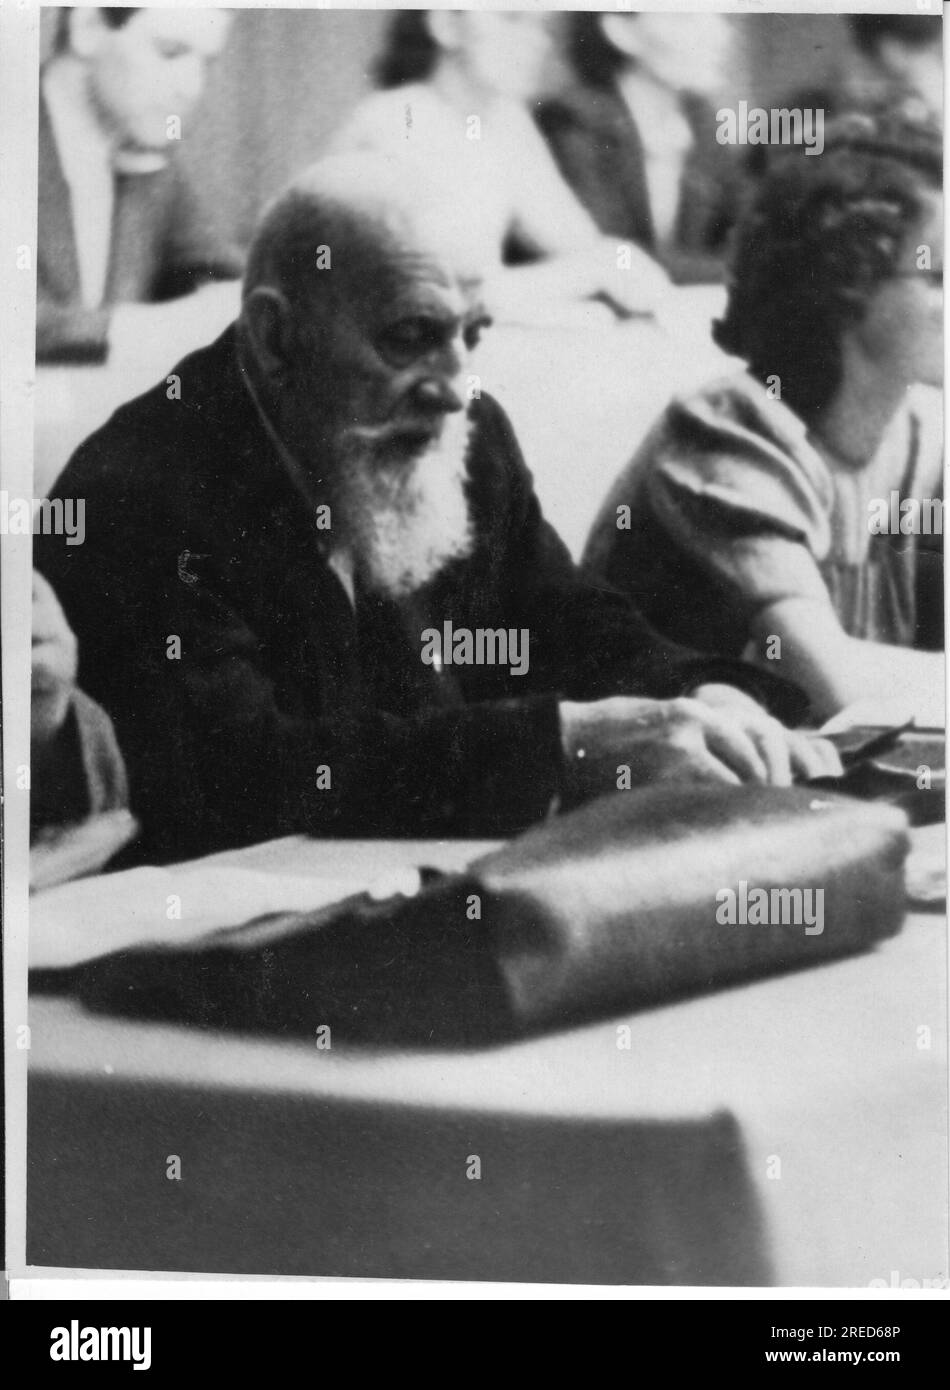 Comrade Eugen Ernst, SED politician during the state delegates' conference of the SED in Potsdam. Photo: MAZ/Archive, 01.07.1950 [automated translation] Stock Photo